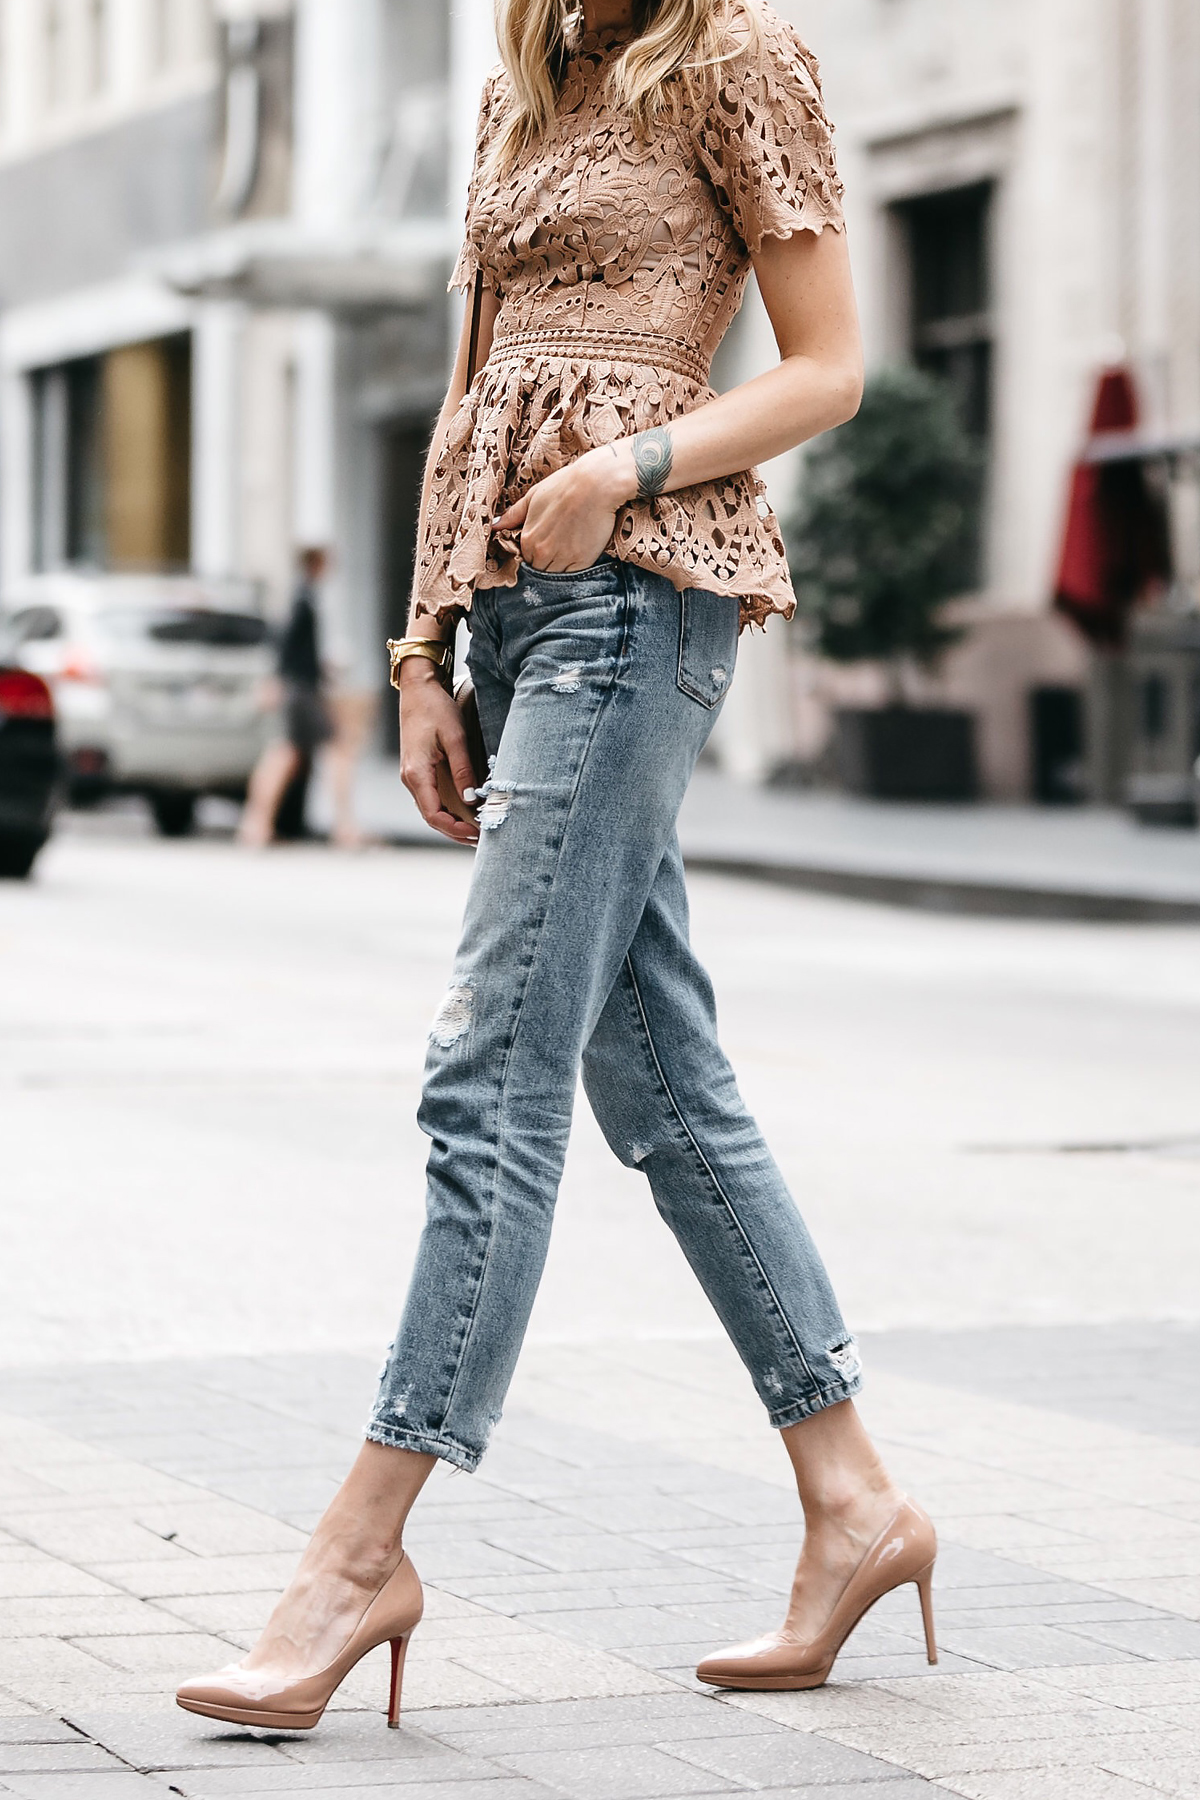 Fashion Jackson, Dallas Blogger, Fashion Blogger, Street Style, Ministry of Style Lush Lace Top, Blush Lace Peplum Top, Pink Lace Peplum Top, Beige Lace Peplum Top, Gucci Soho Disco Handbag, Denim Ripped Relaxed Jeans, Christian Louboutin Pigalle Nude Pumps